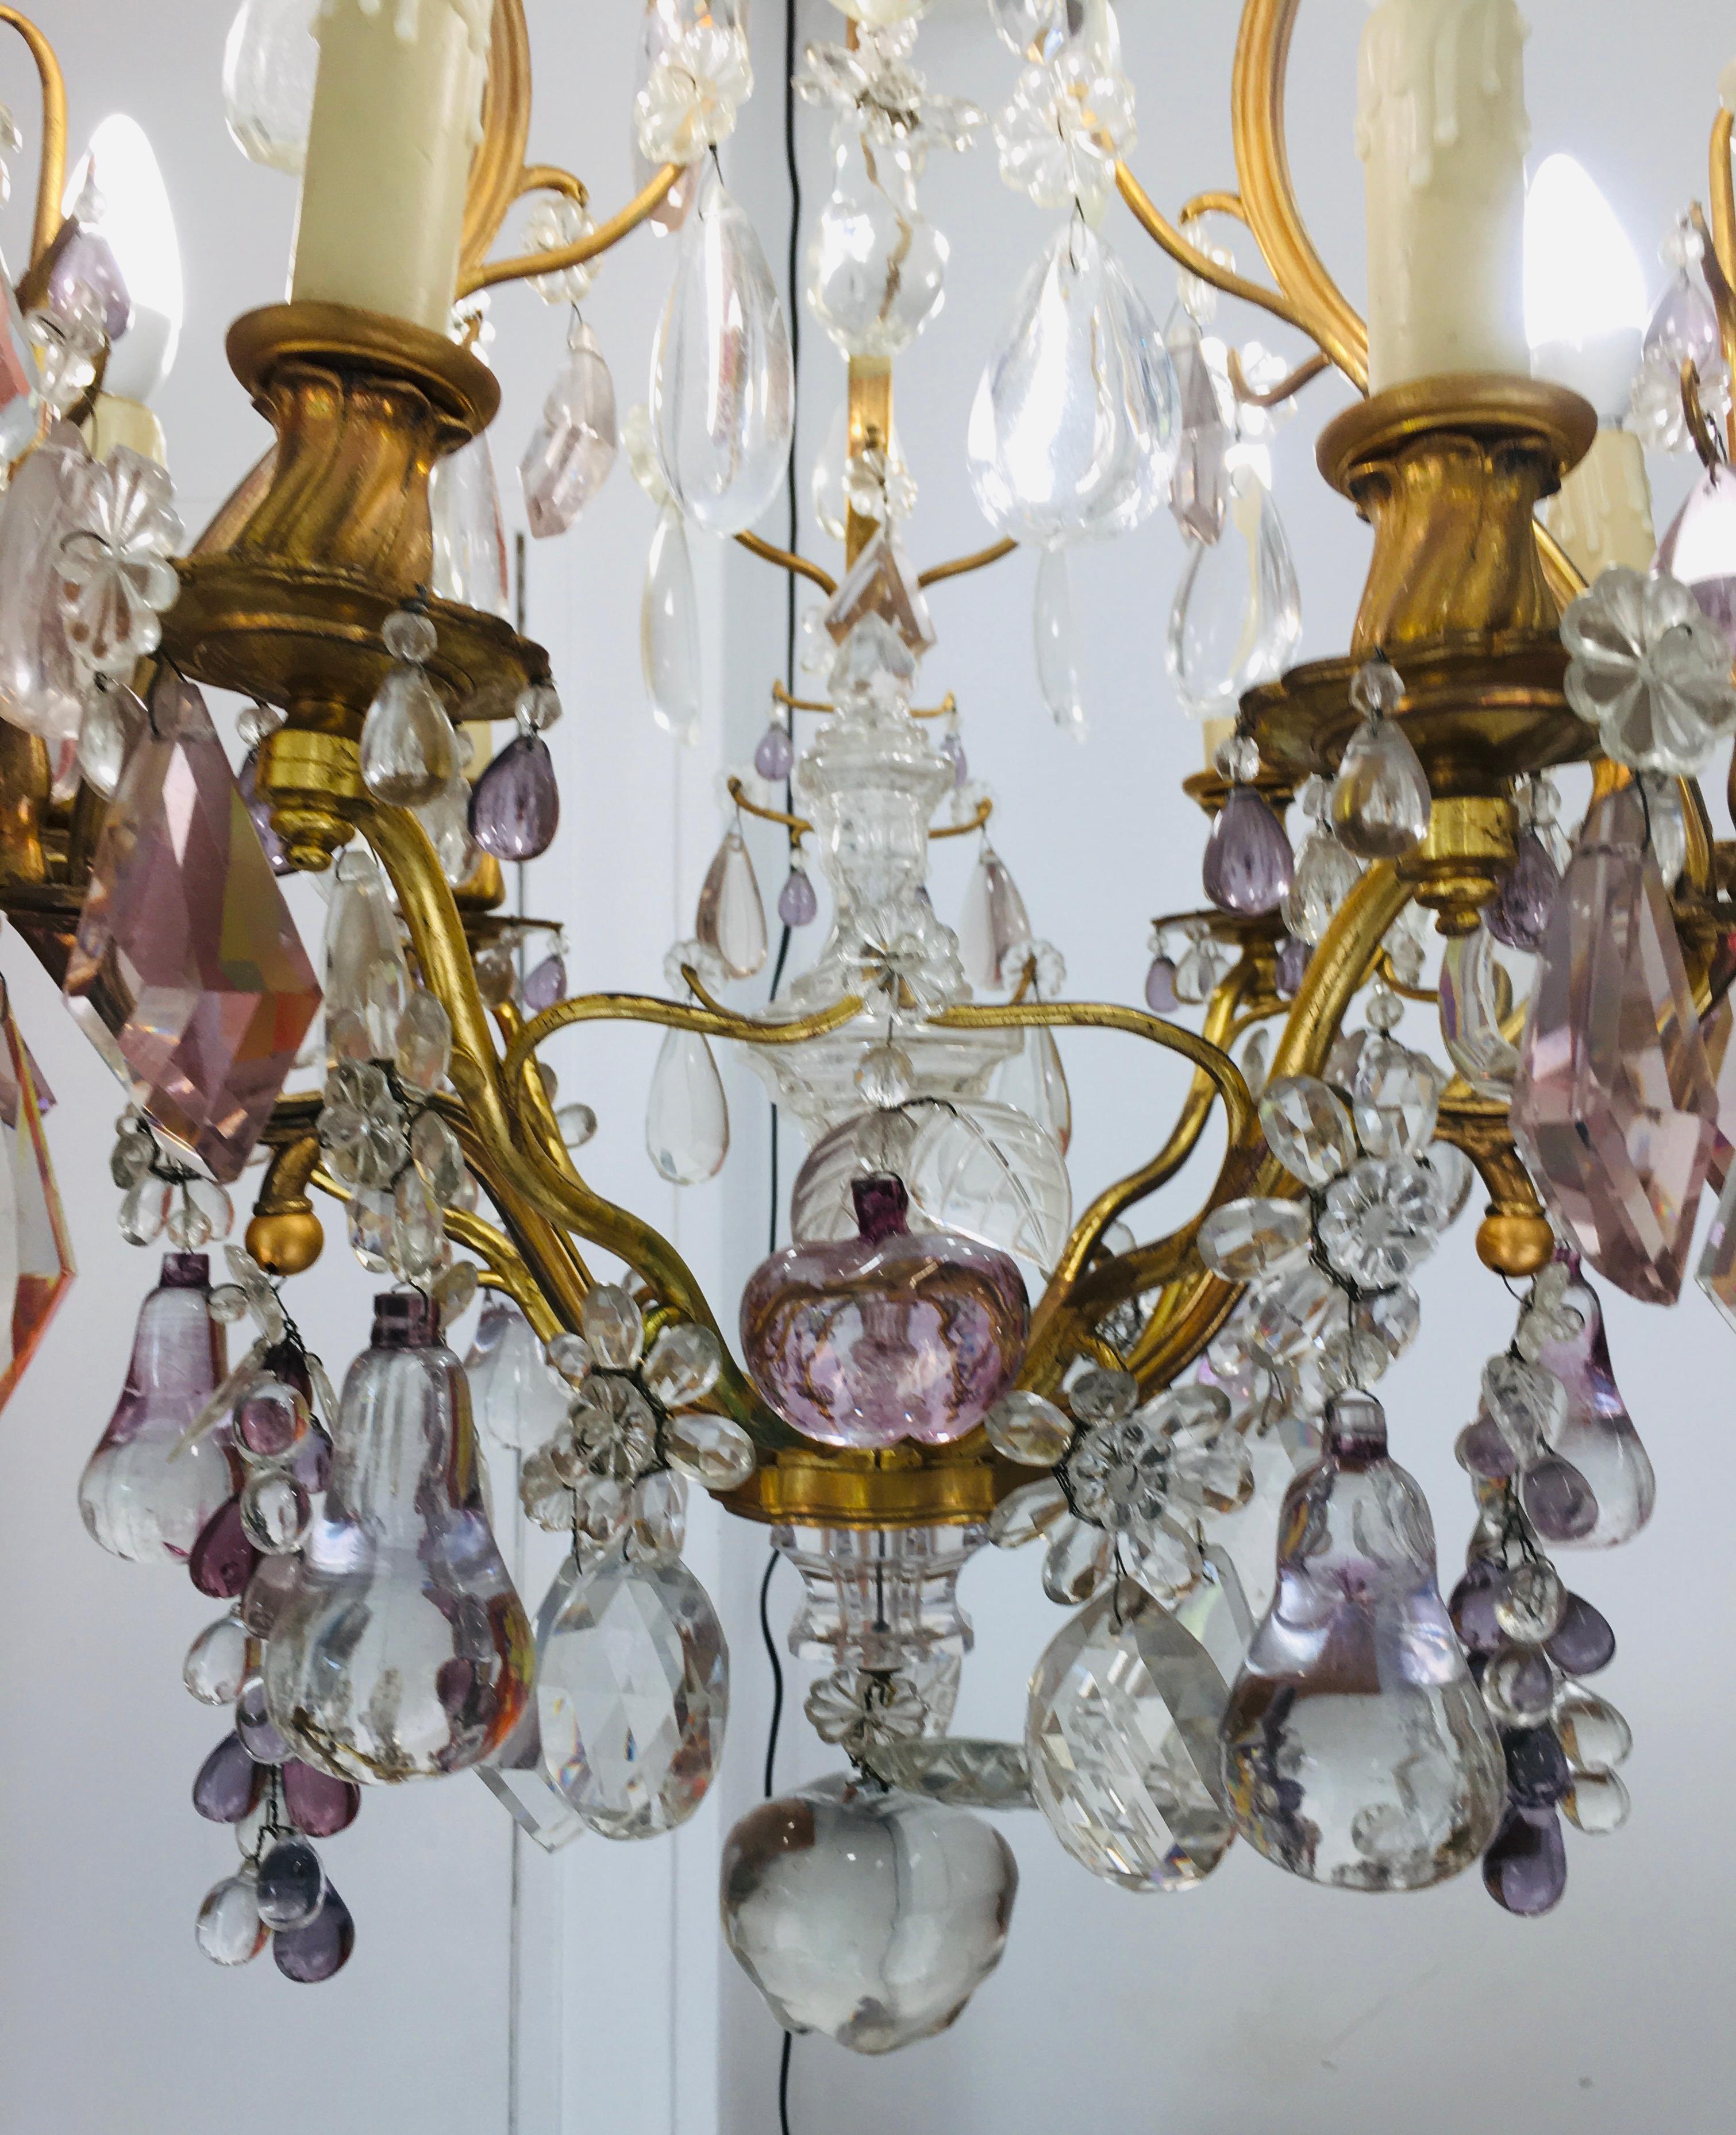 very unic and elegant French Maison Bagues bronze and glass Chandelier.
Glass Fruits, flowers and geometric cristal on a gilded bronze frame.
Six lights which give a somptuous lightening.
Great design the symbols of excellence created since 1840